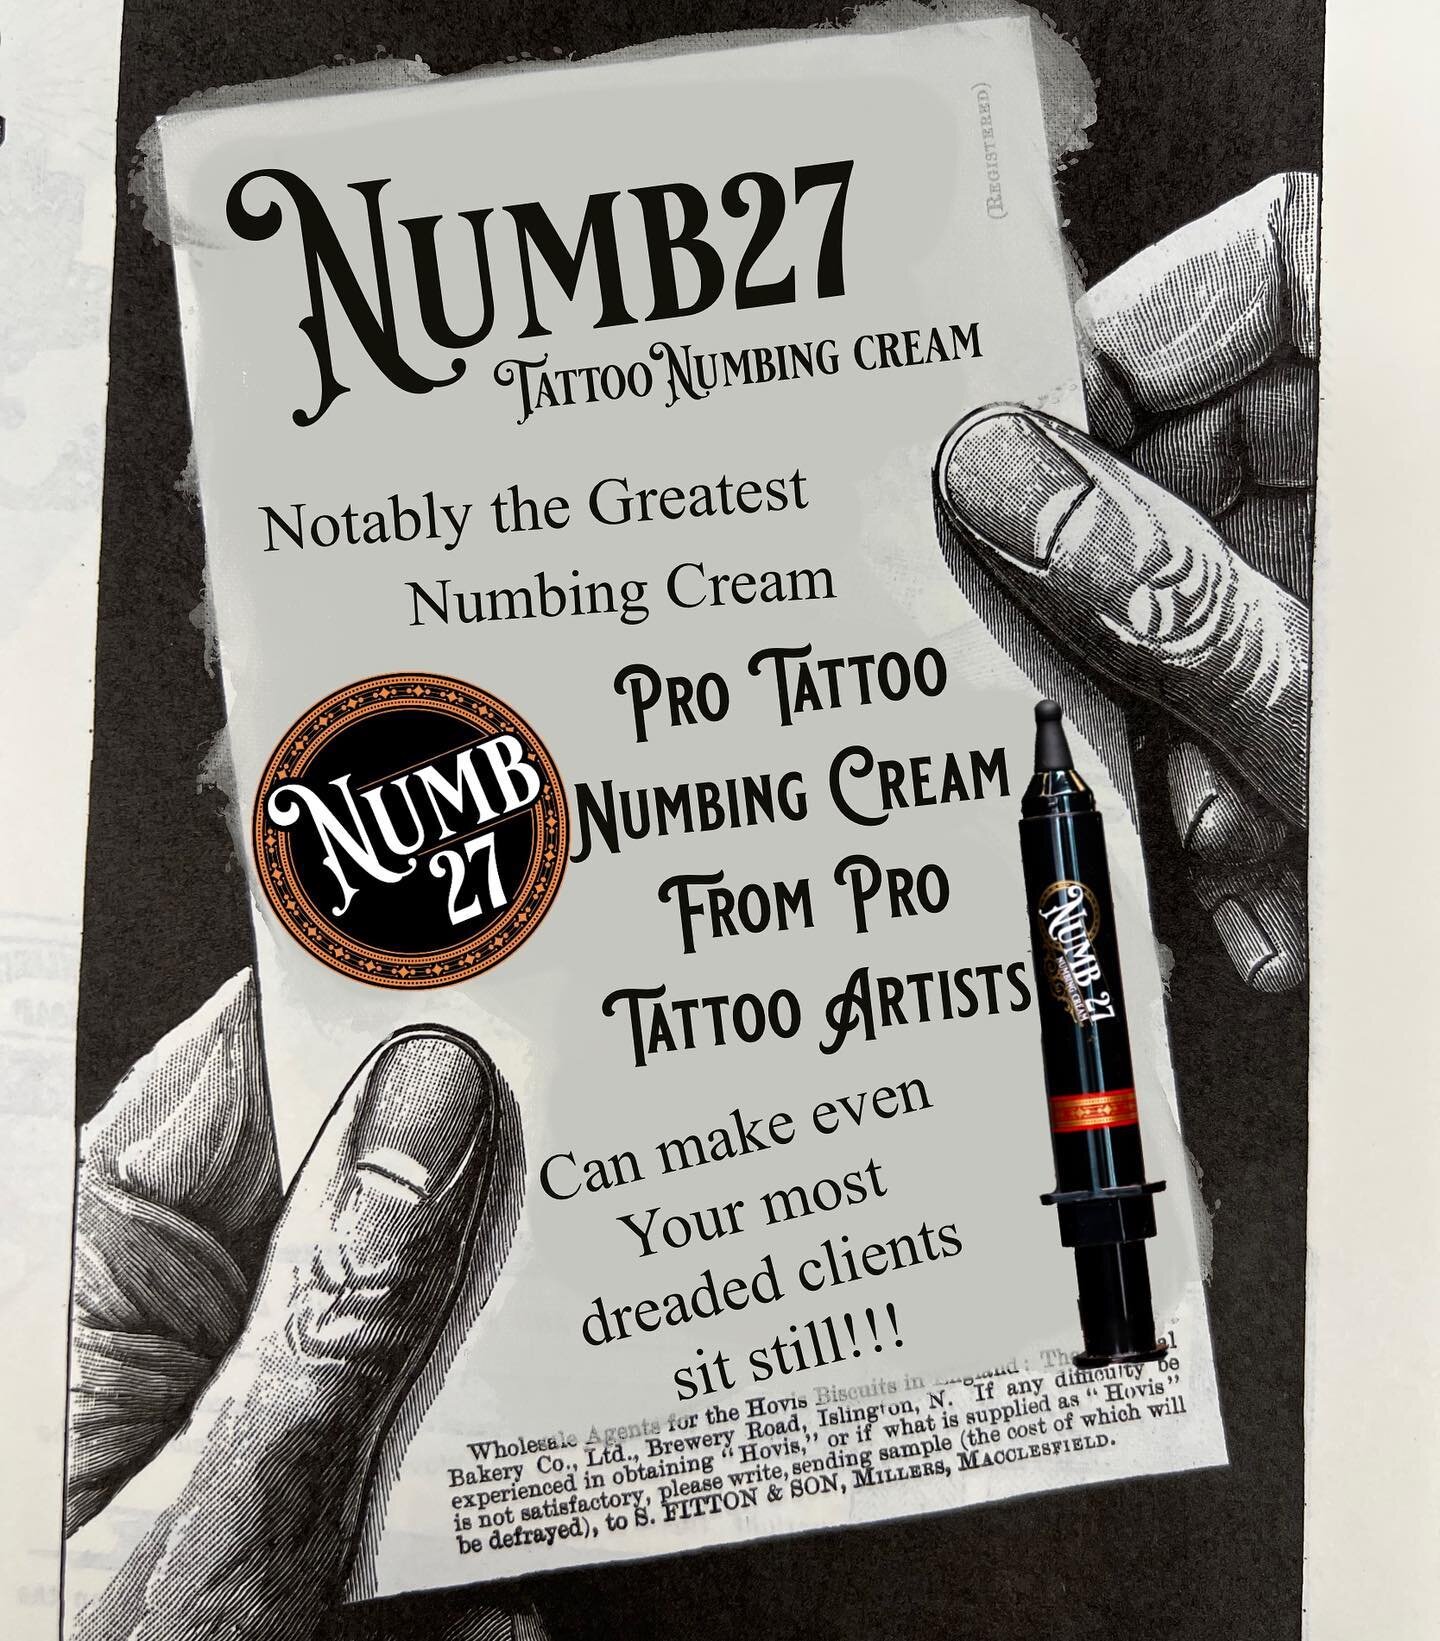 Time to go order your Numb27!!! Go to Numb27.com 

All your tattoo nightmares can finally disappear 🤯

#tattoonumbingcream #numb27tattoocream #numb27 #numbingcream #workhorseirons #kingpintattoosupply #tattoosupply #tattoo #tattooartist #tattooart